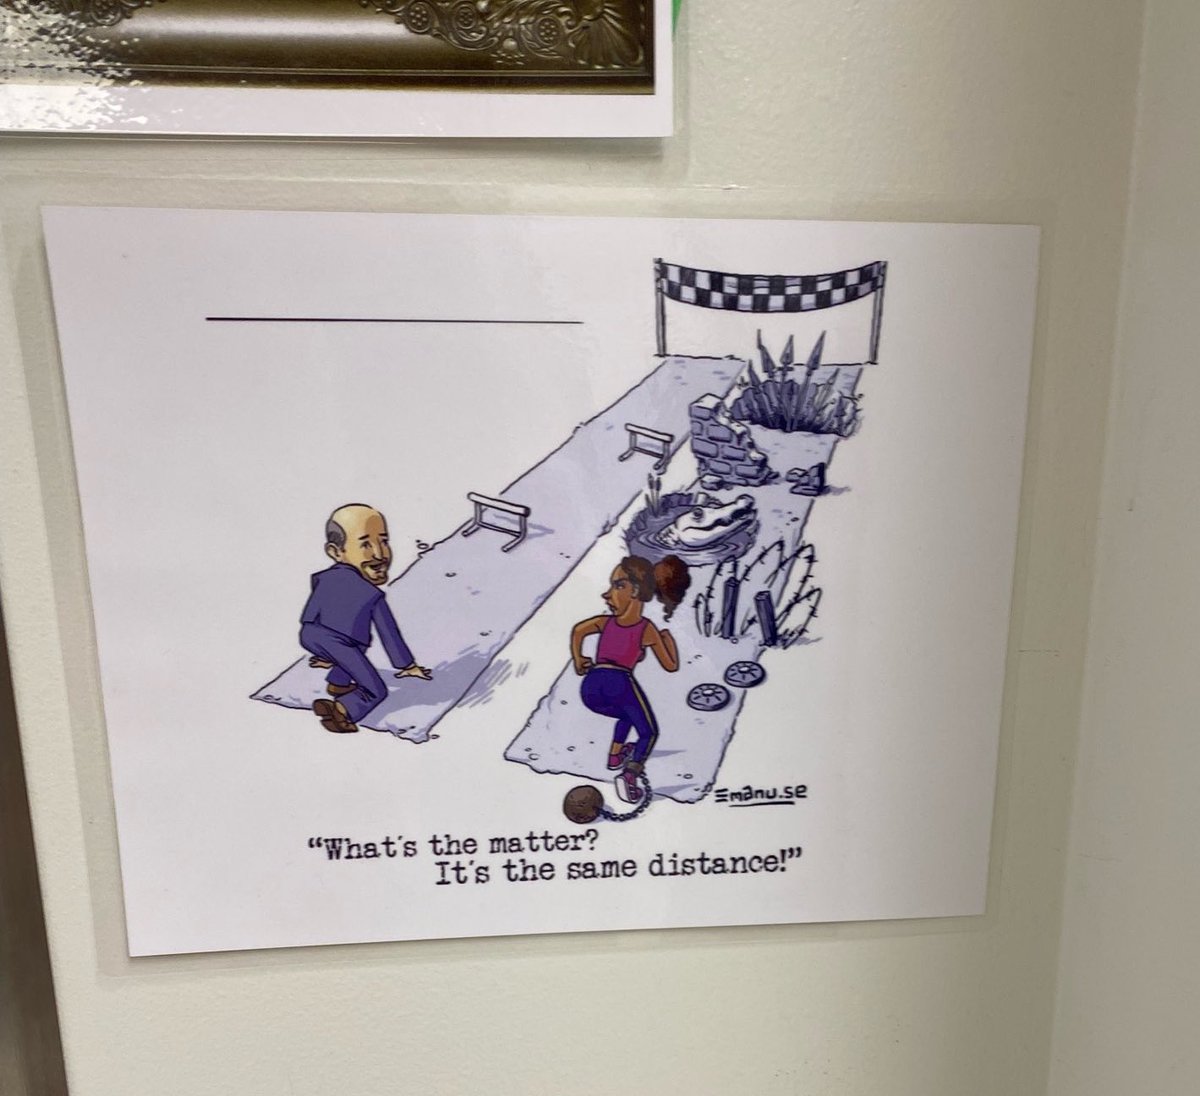 The white man has it so easy while the black woman has all kinds of obstacles in her way. This was displayed in the hallway at @lexwrdsb elementary school in Waterloo, ON. This inevitably leads to racial division, guilt and resentment, not harmony.